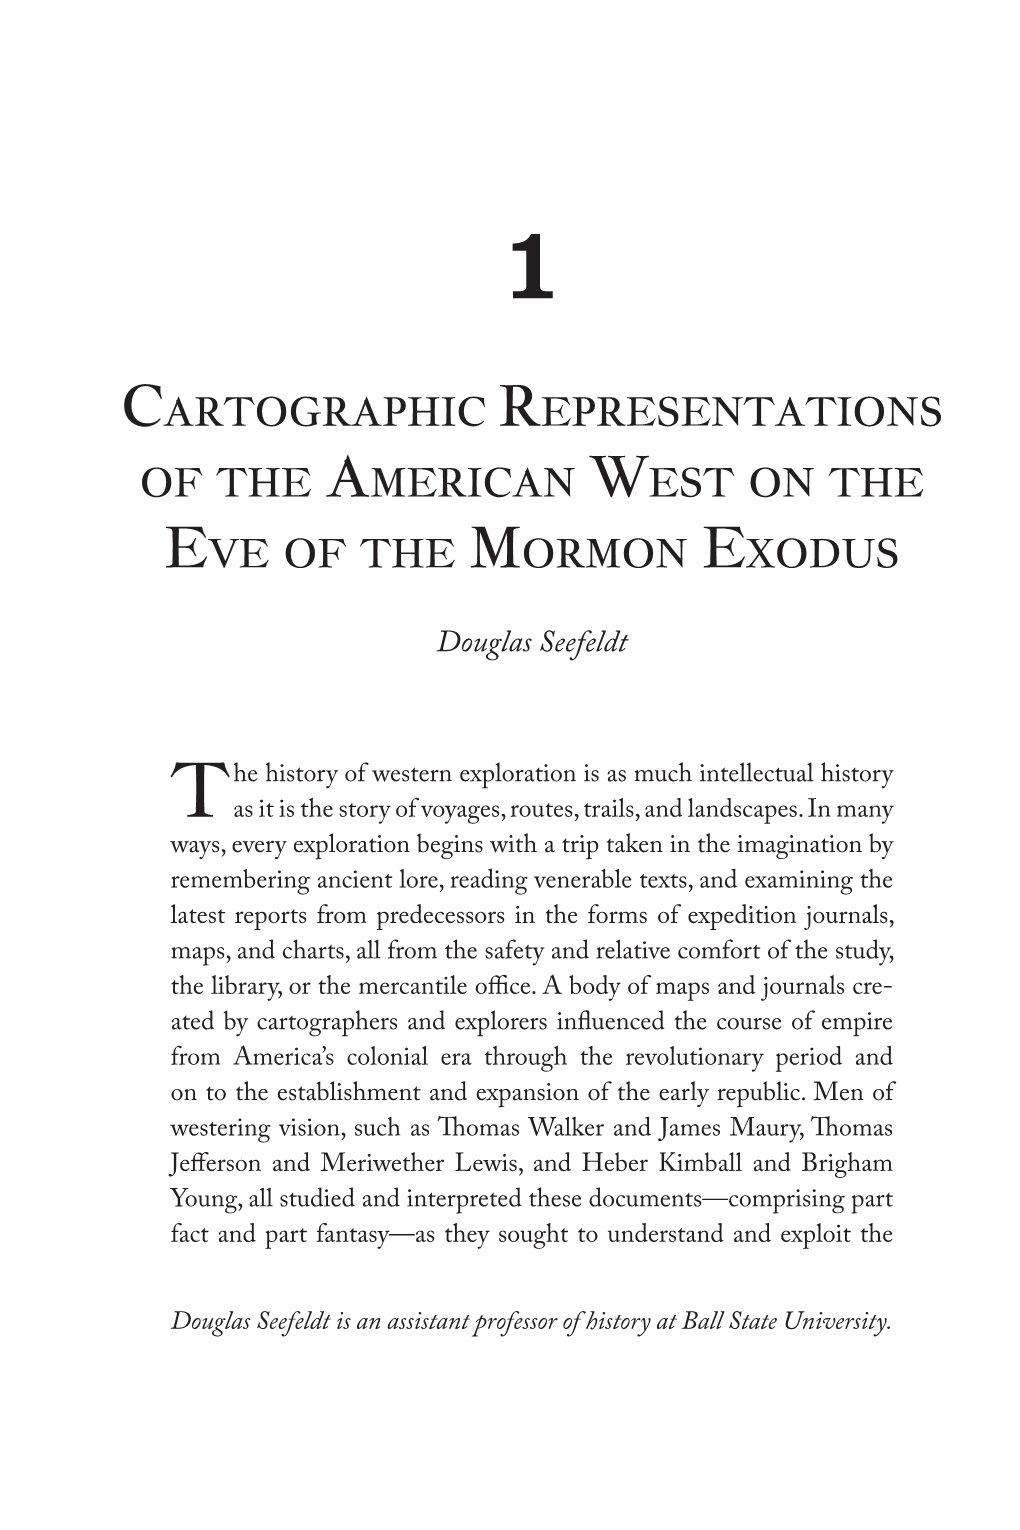 Cartographic Representations of the American West on the Eve of the Mormon Exodus